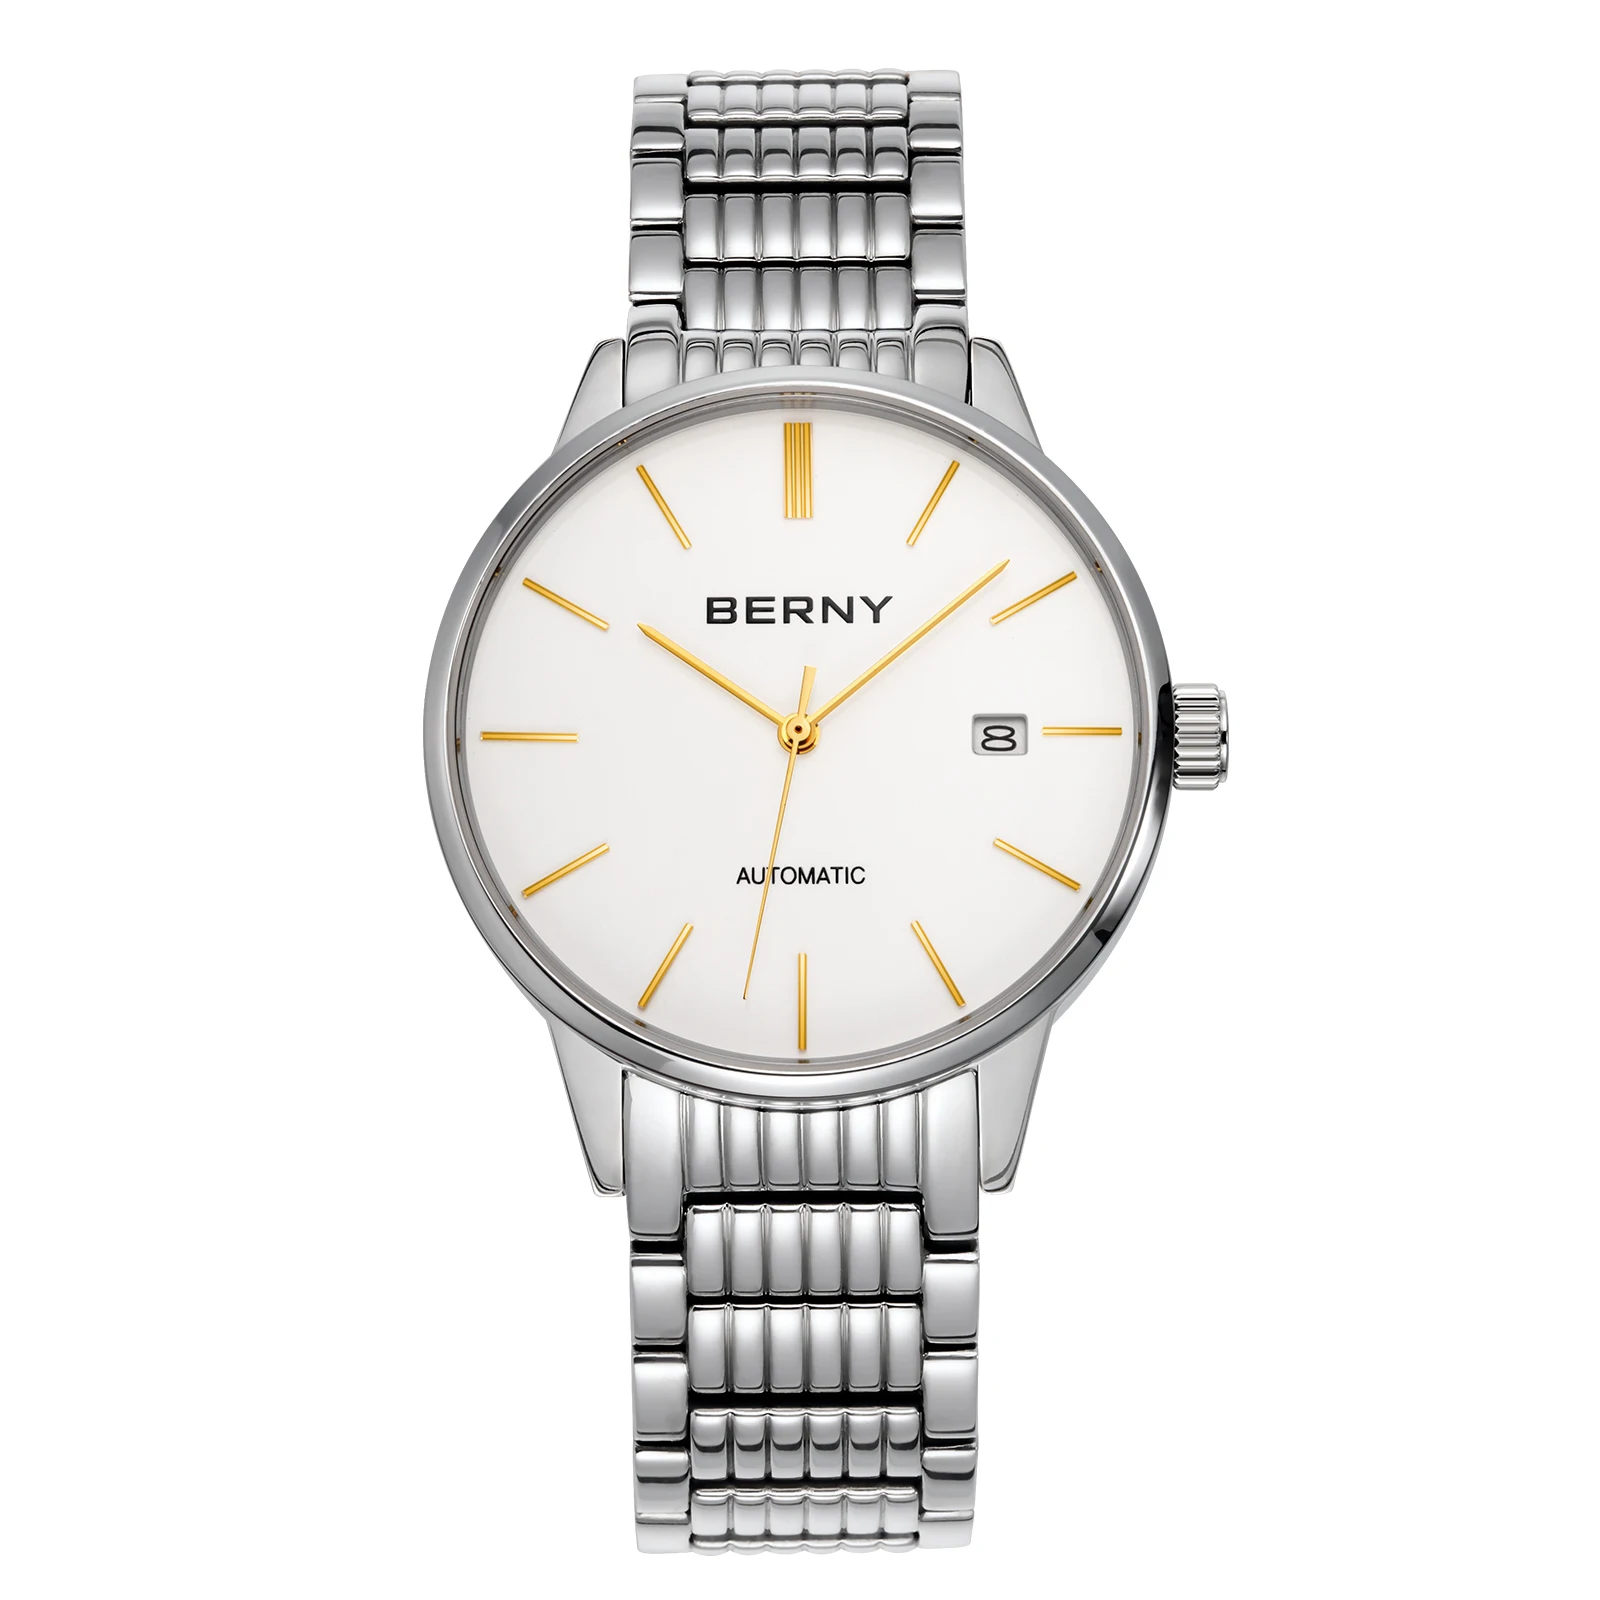 

BERNY 5ATM Automatic Watch for Men Mechanical Wristwatches Luxury Brand Male Clock Sapphire Stainless Steel 38mm Men's Watches